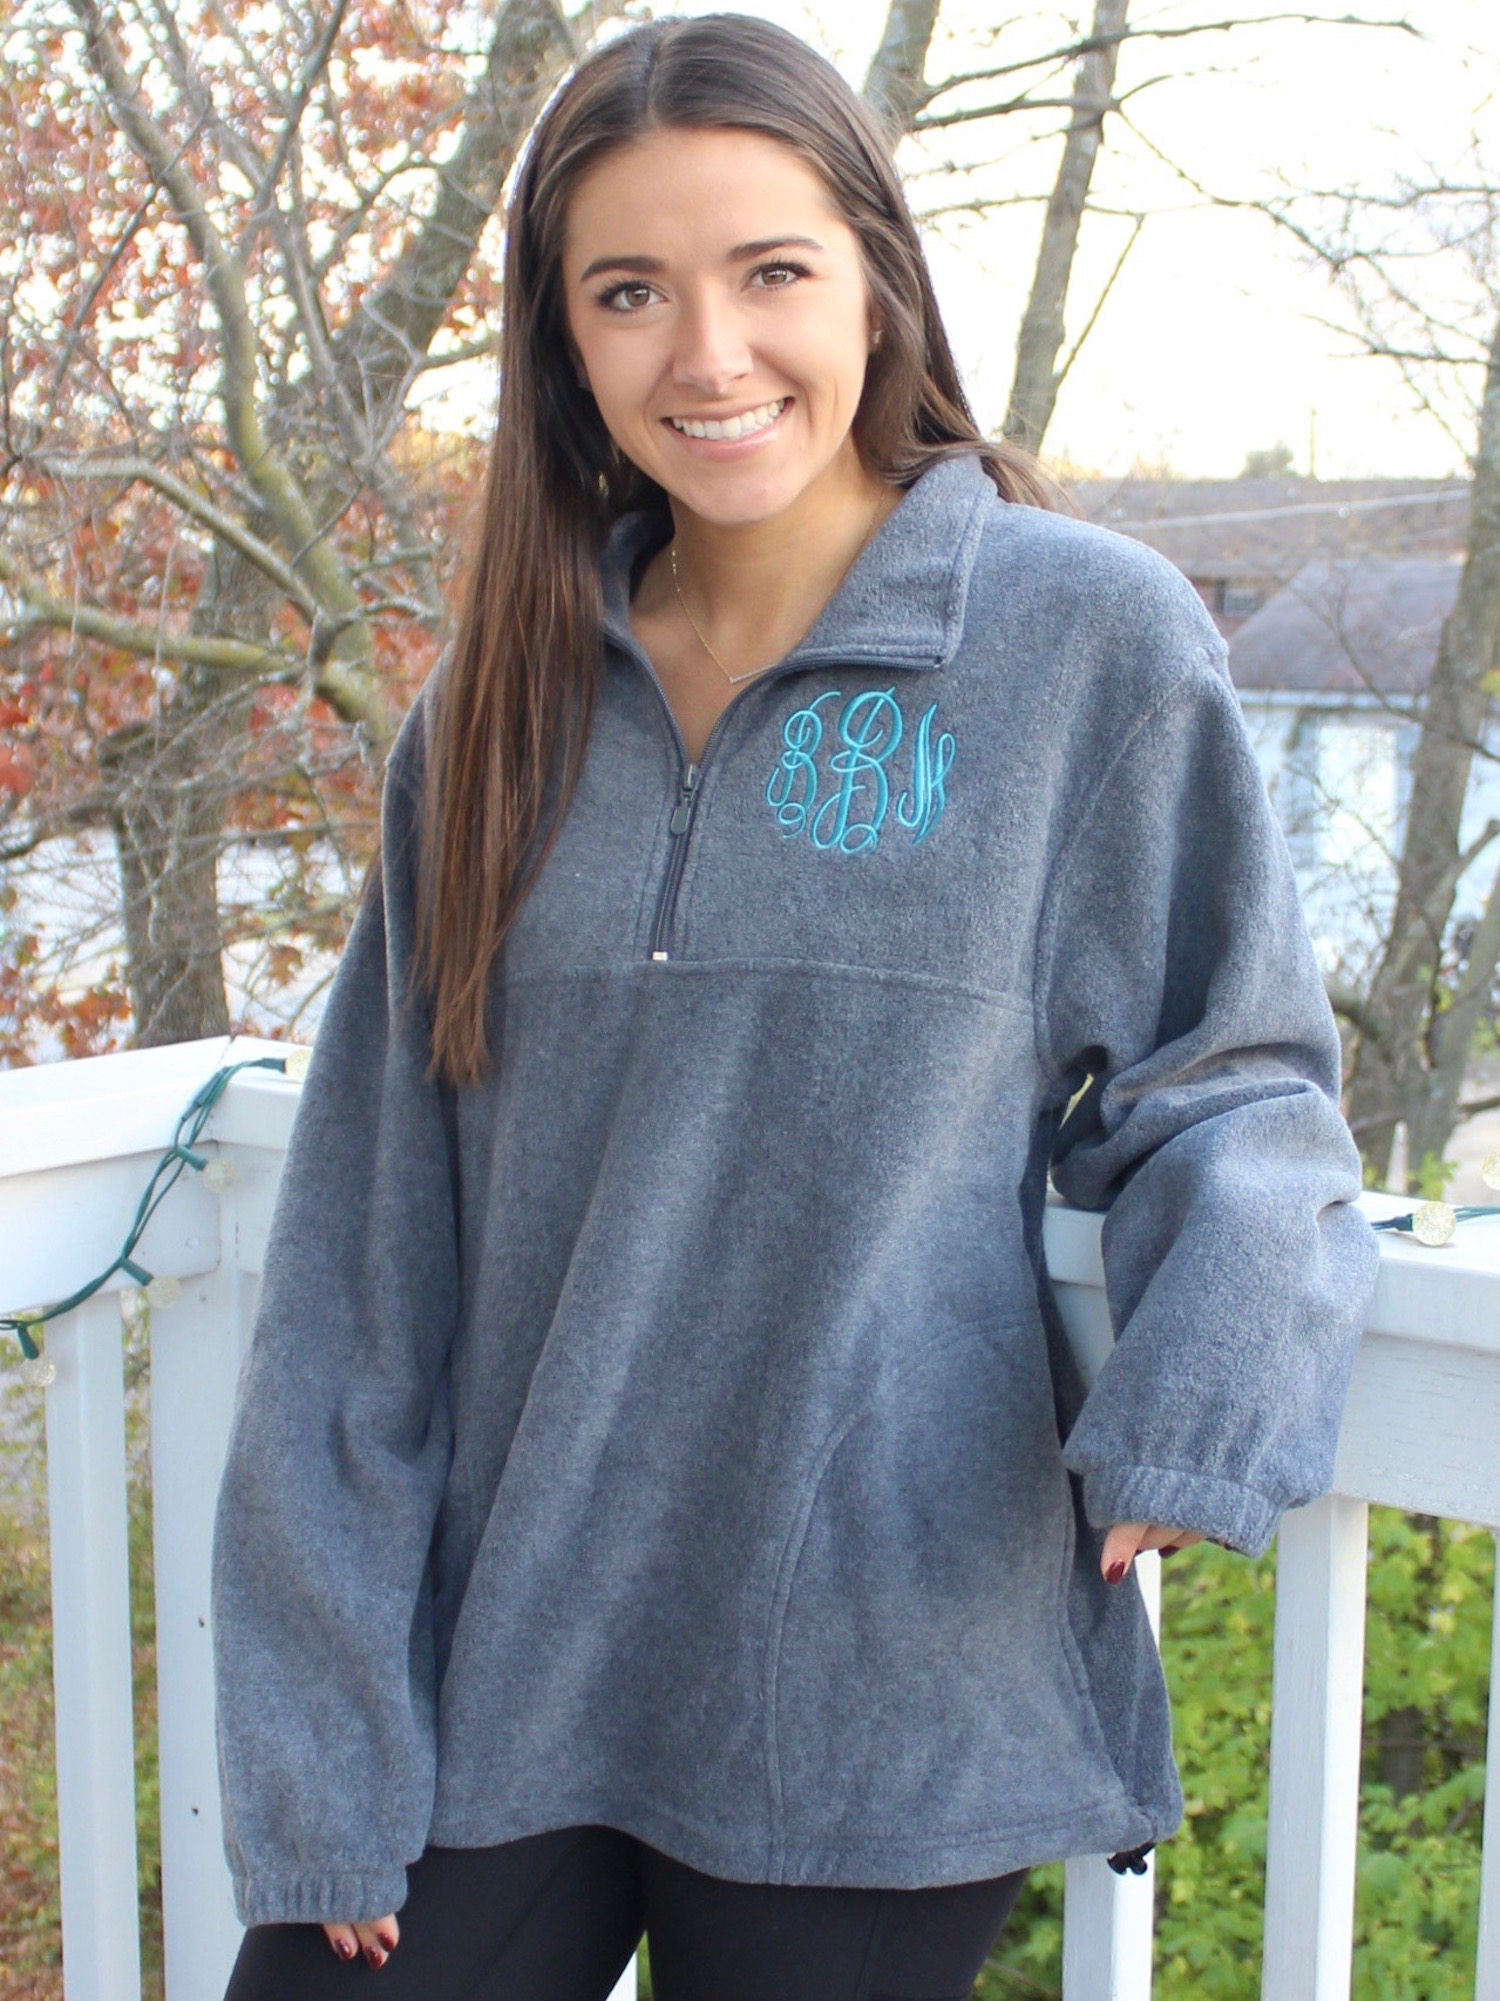 FREE Shipping Monogram Pullover Personalized Quarter Zip 